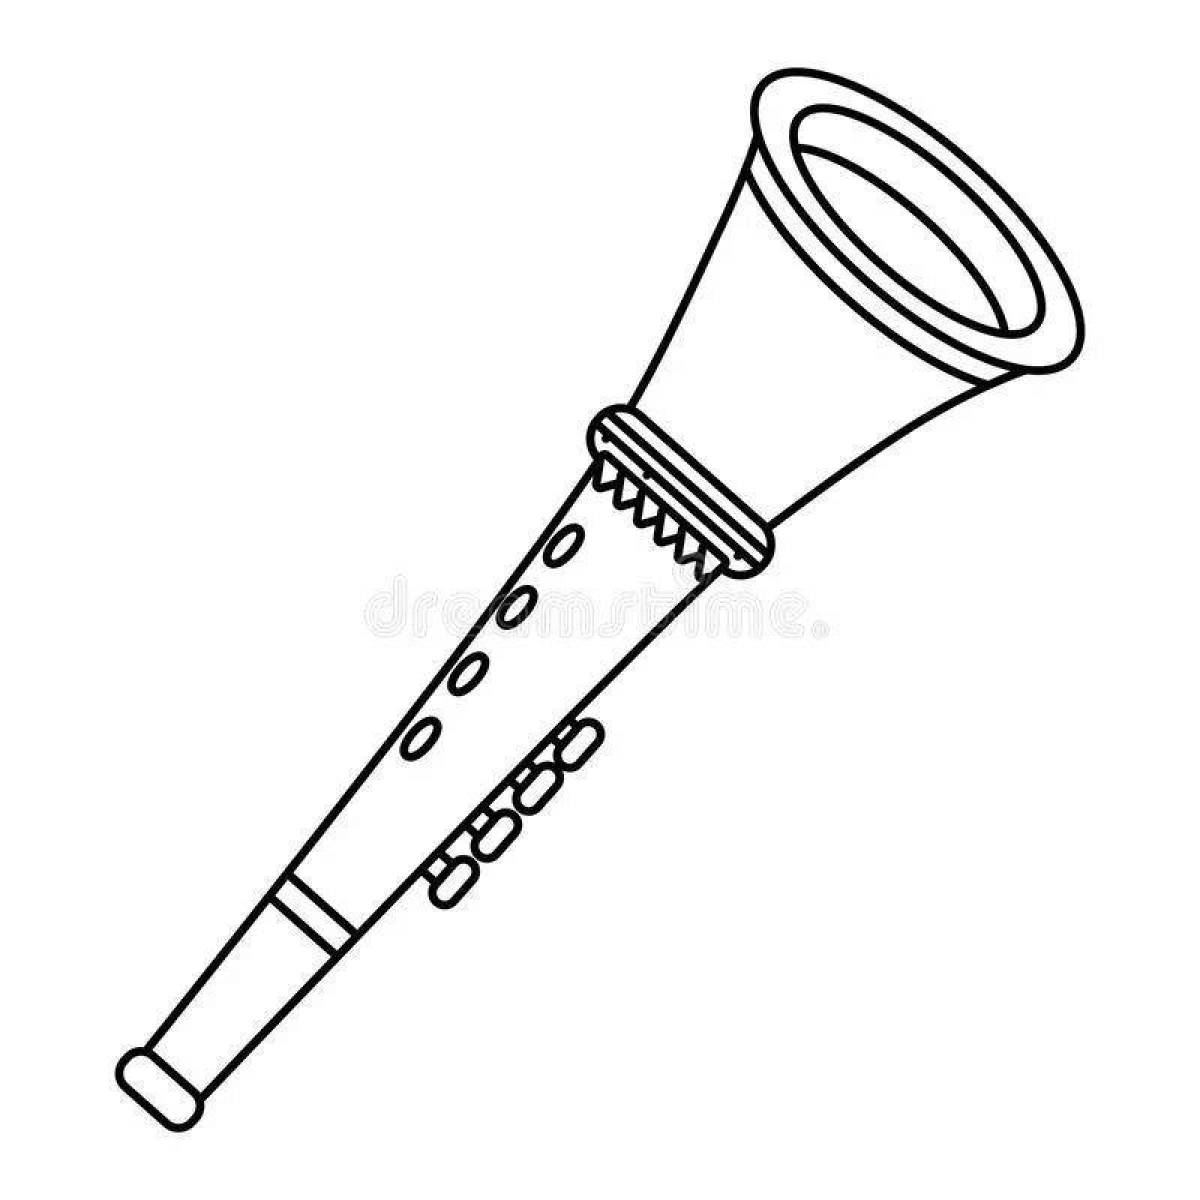 Coloring page wild horn musical instrument